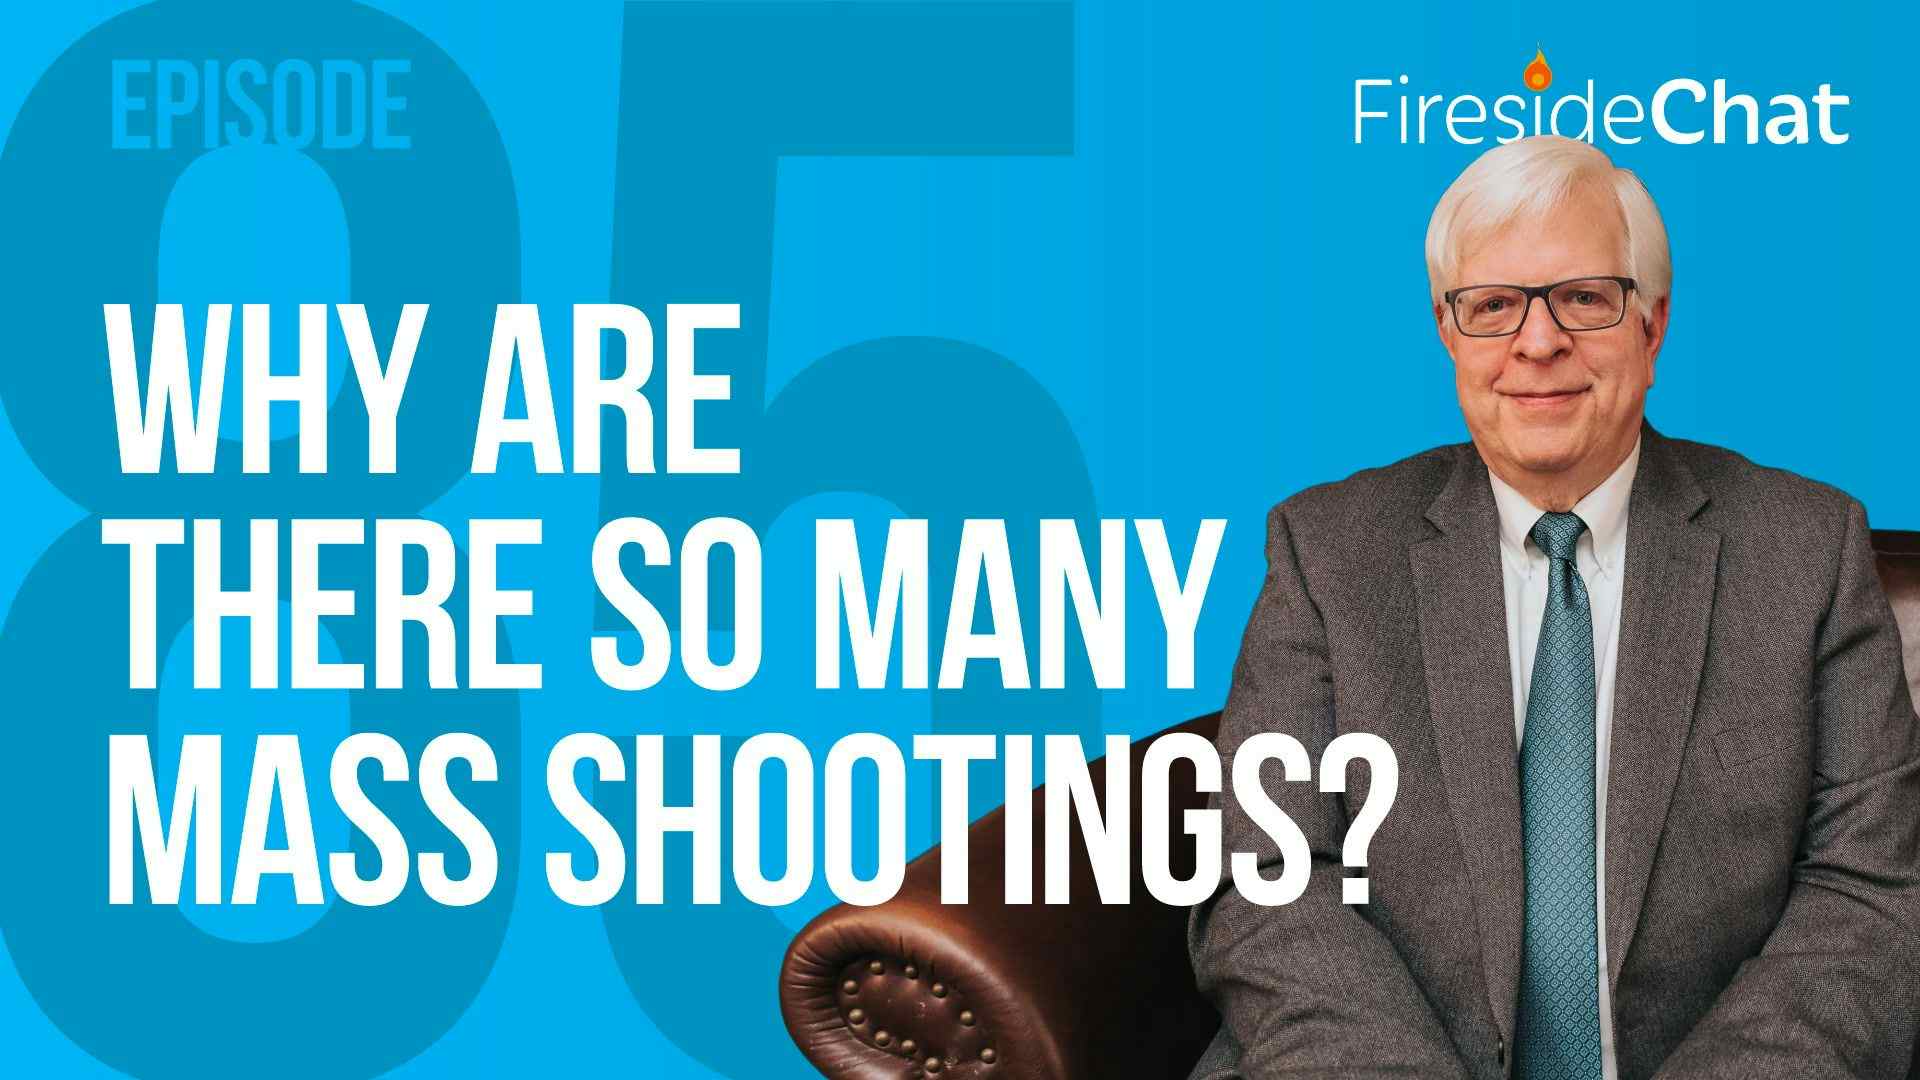 Ep. 85 - Why Are There So Many Mass Shootings?